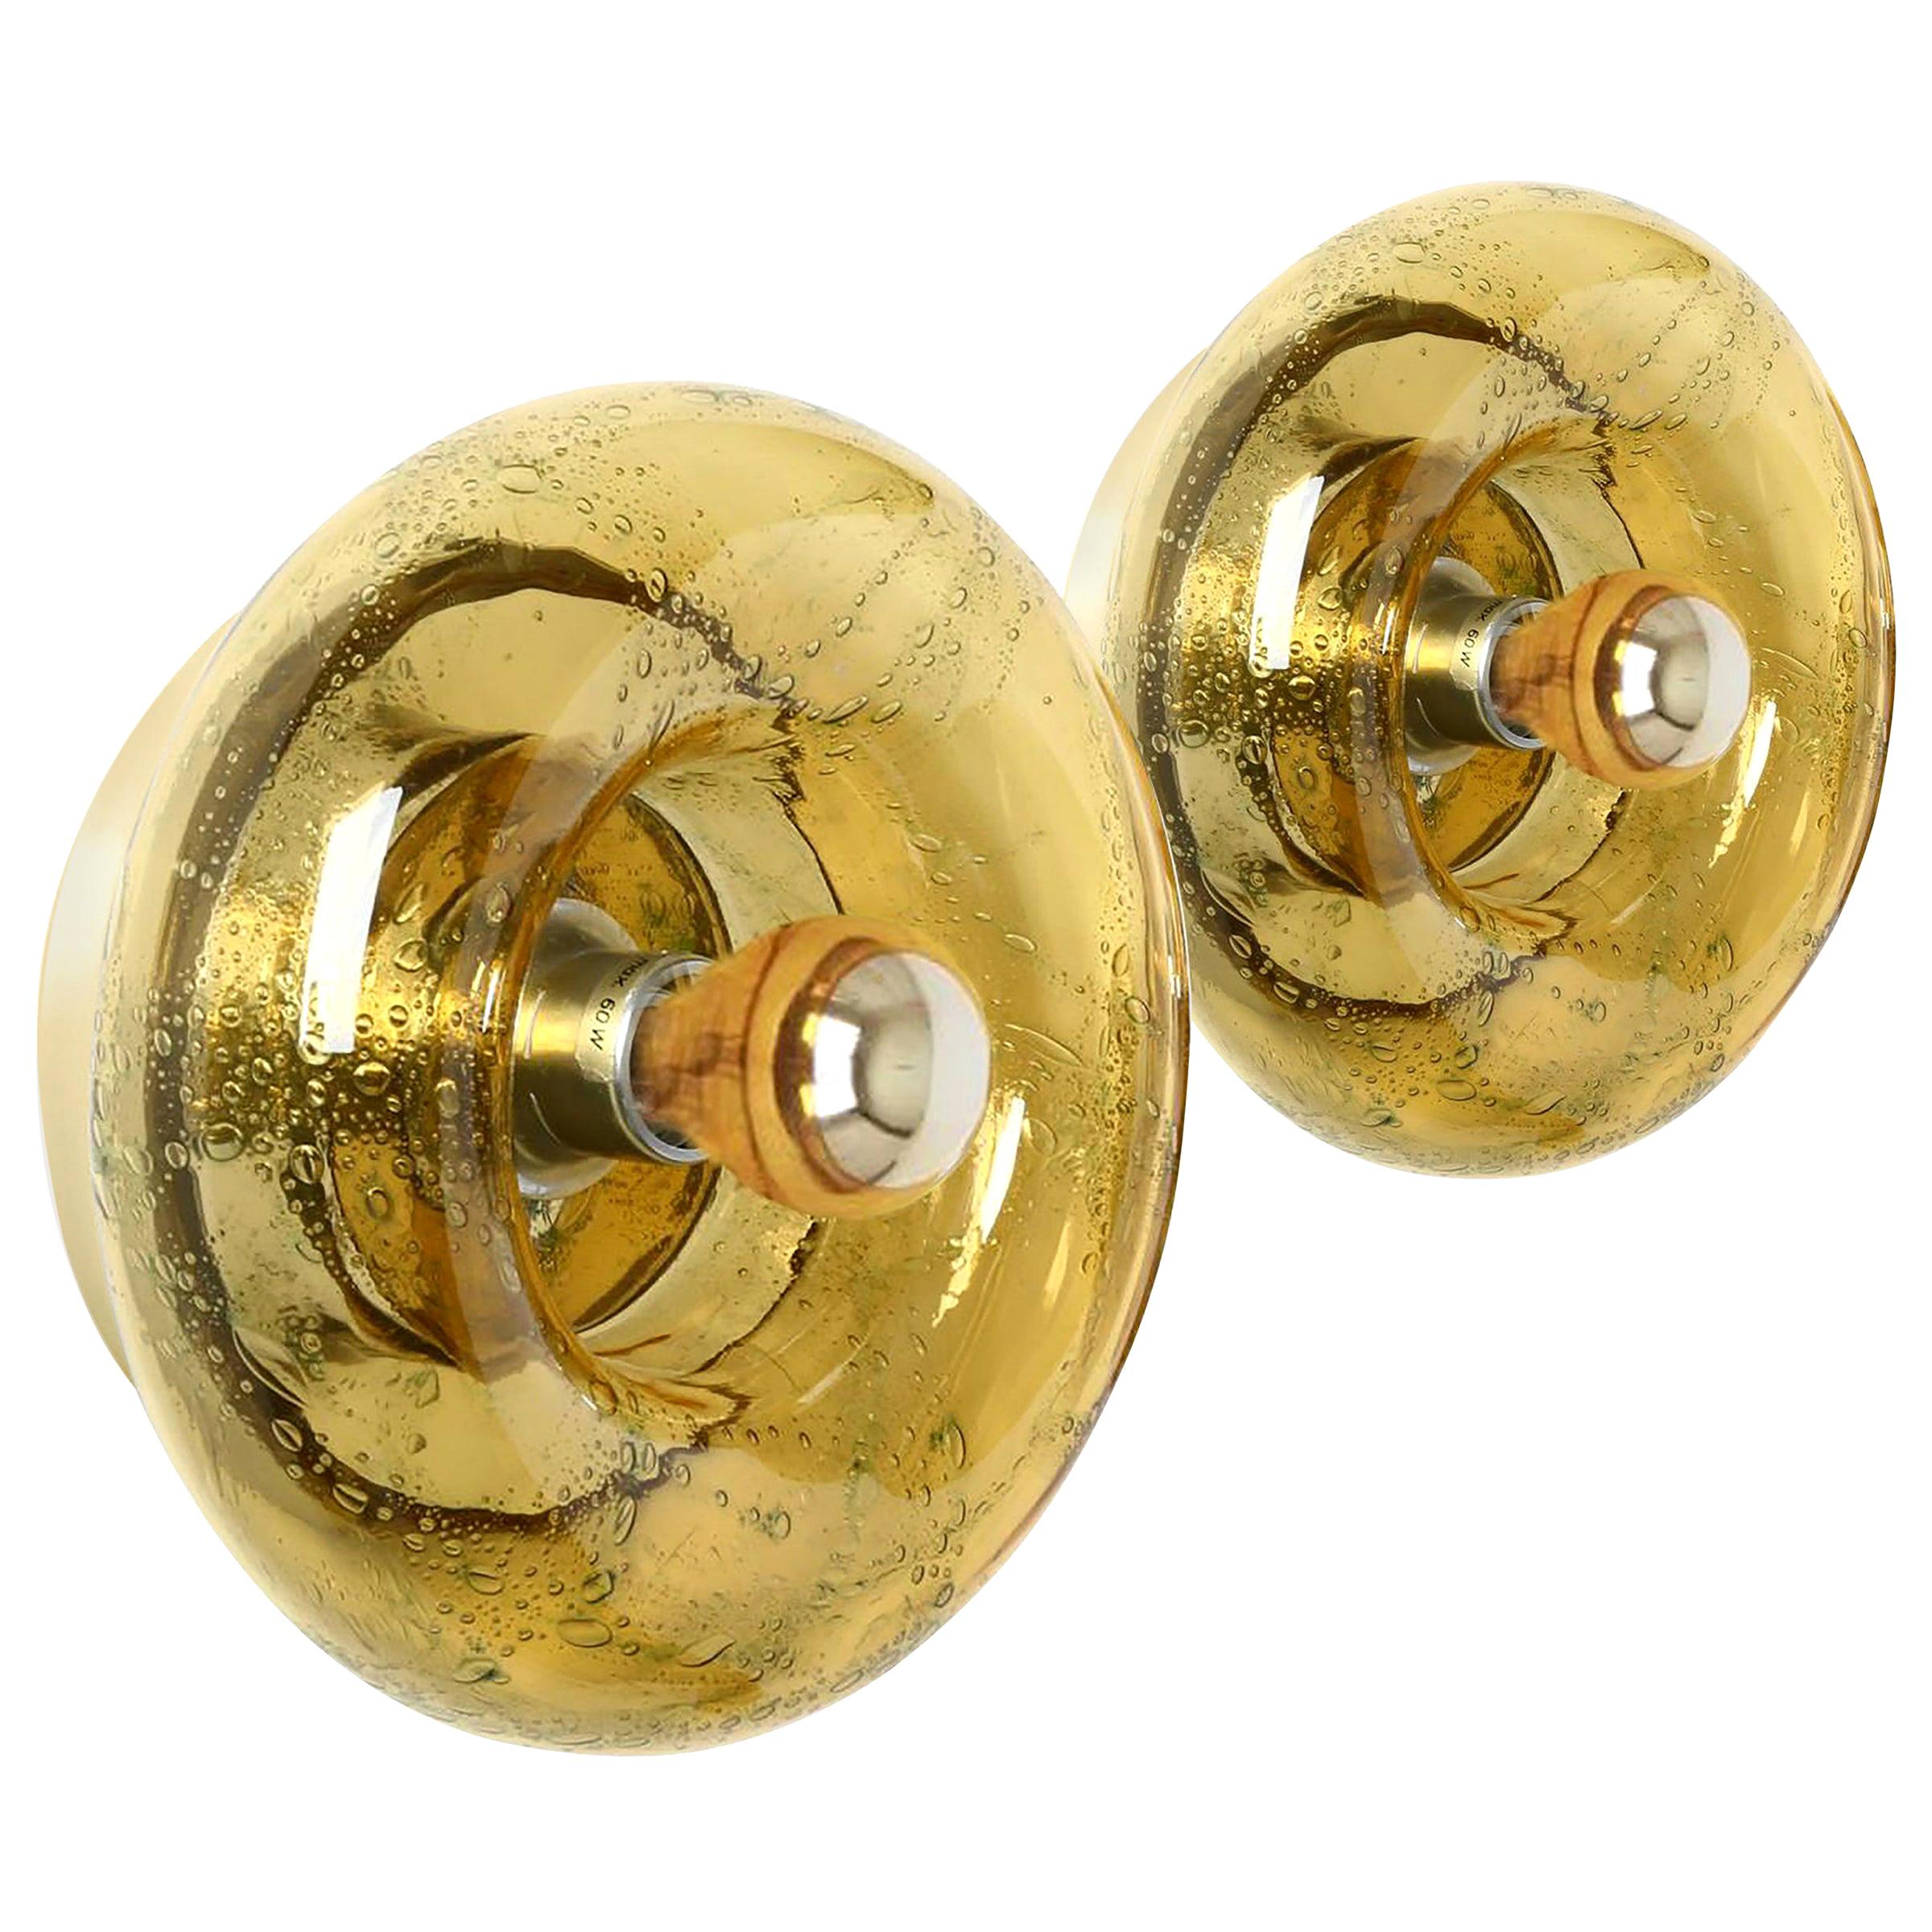 Wonderful 20th century Murano wall sconces which can also be used as ceiling fixture. Manufactured in the 1960s. It is made of amber colored glass and brass end metal.

Two sizes available: four 10.6 inch (27 cm) and two 8.7 inch (22 cm)

Very